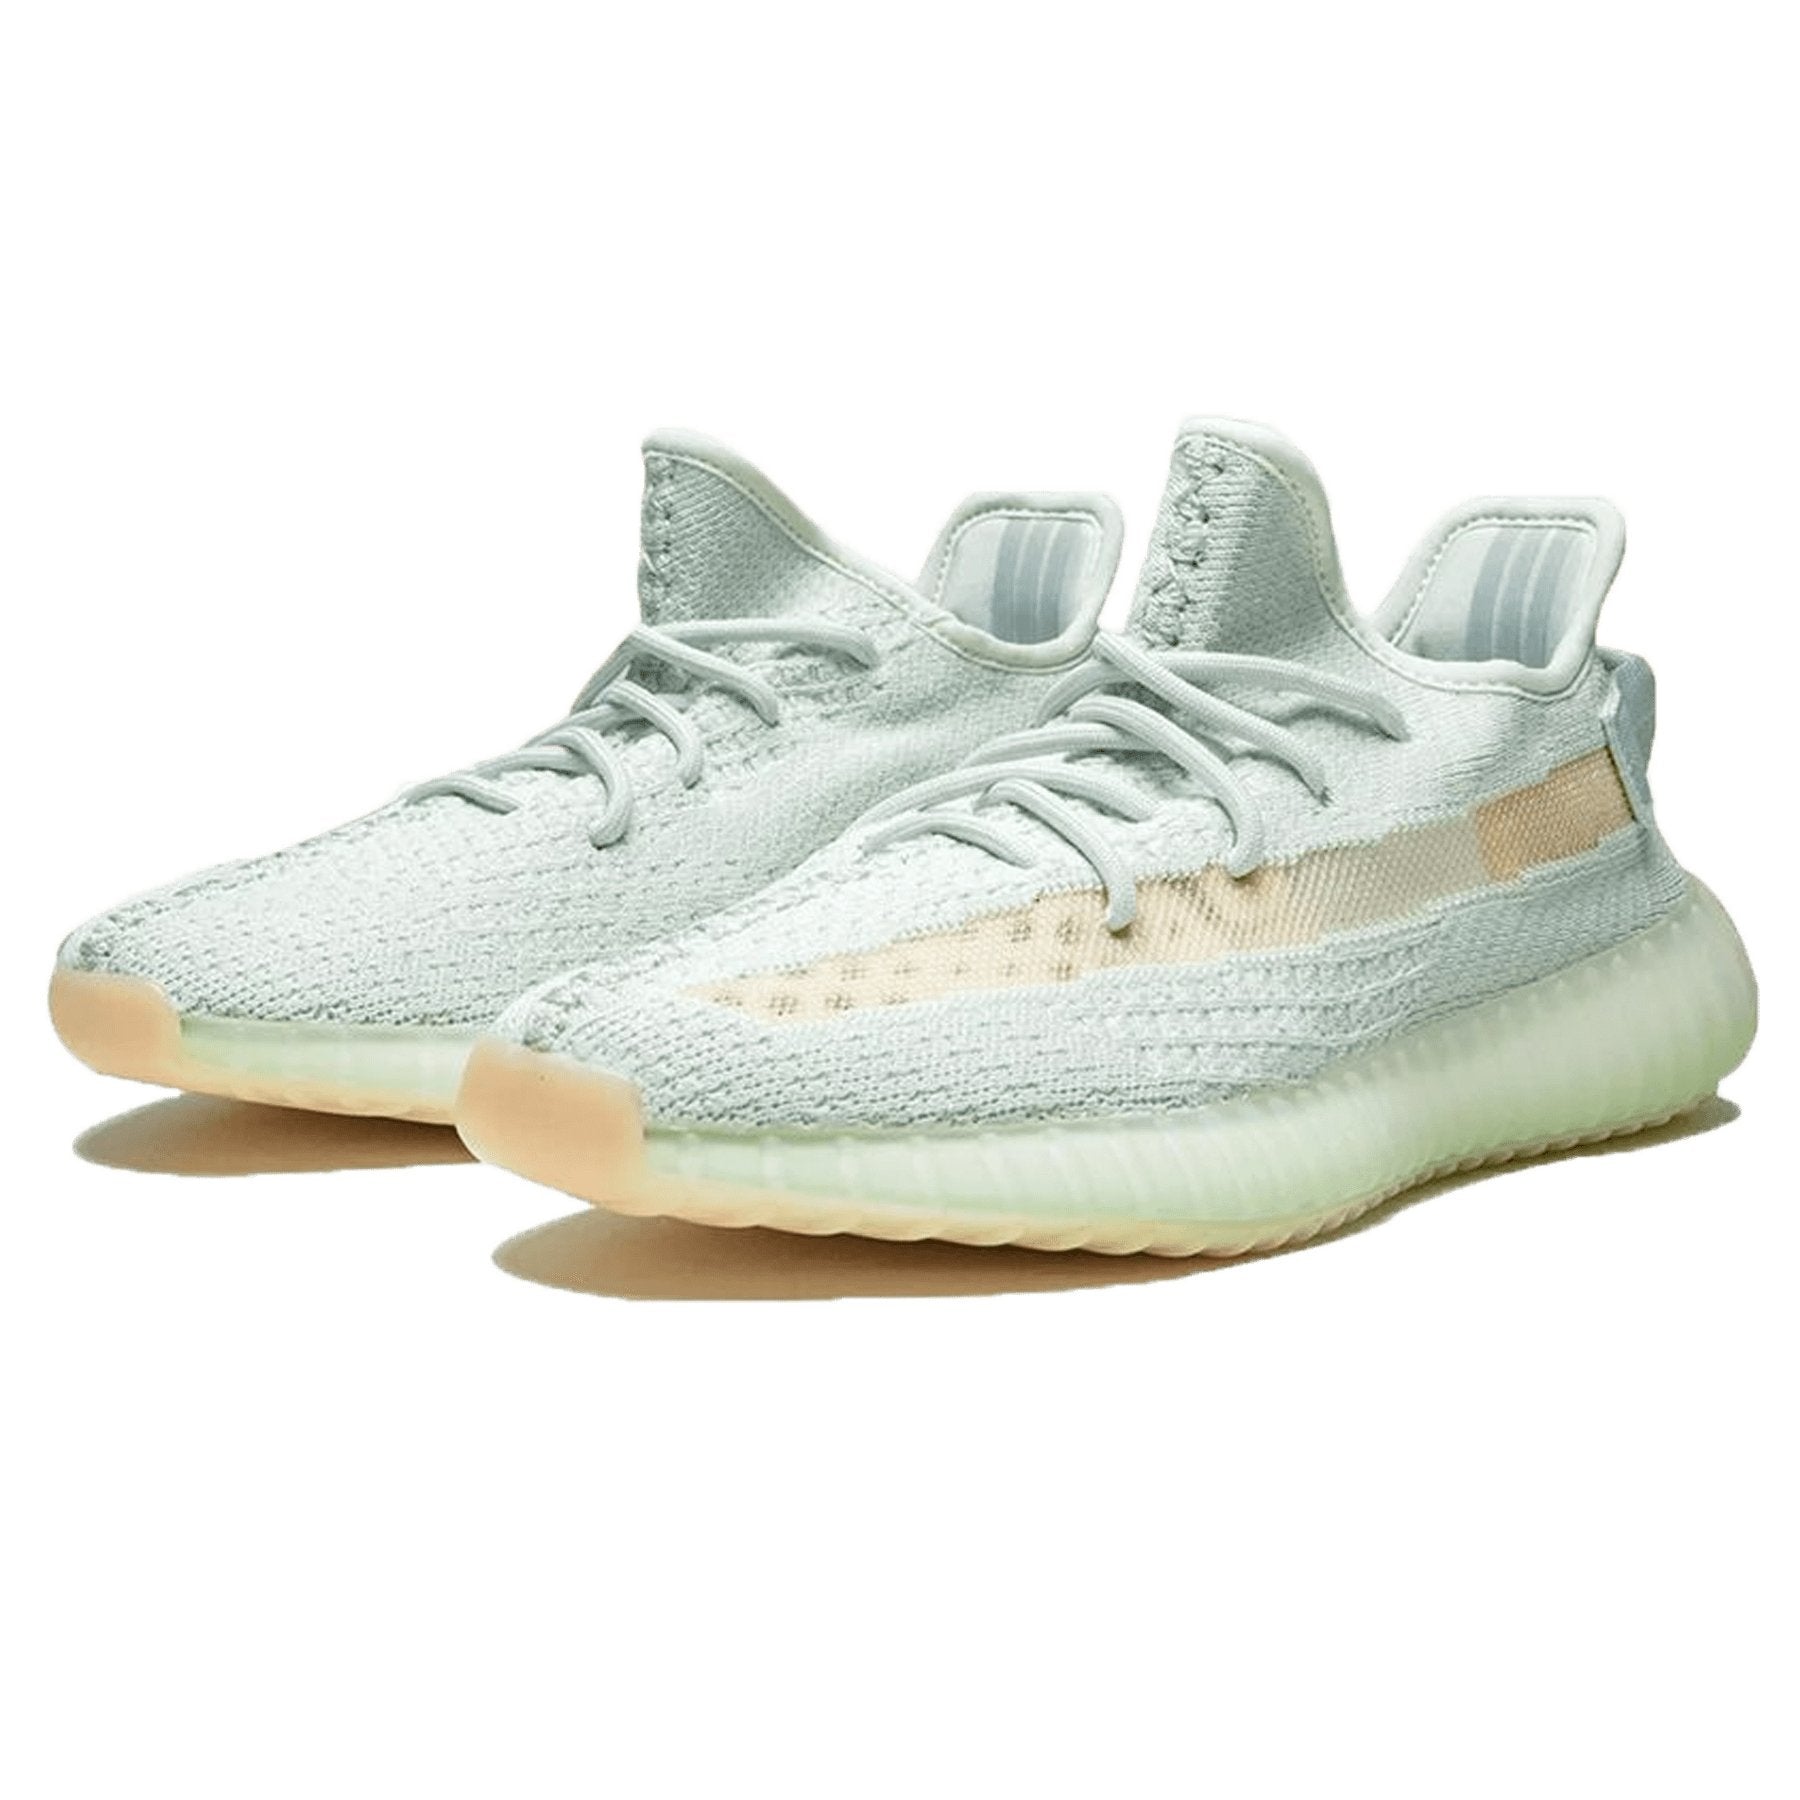 yeezy boost 350 v2 HYPERSPACE 28.5cm